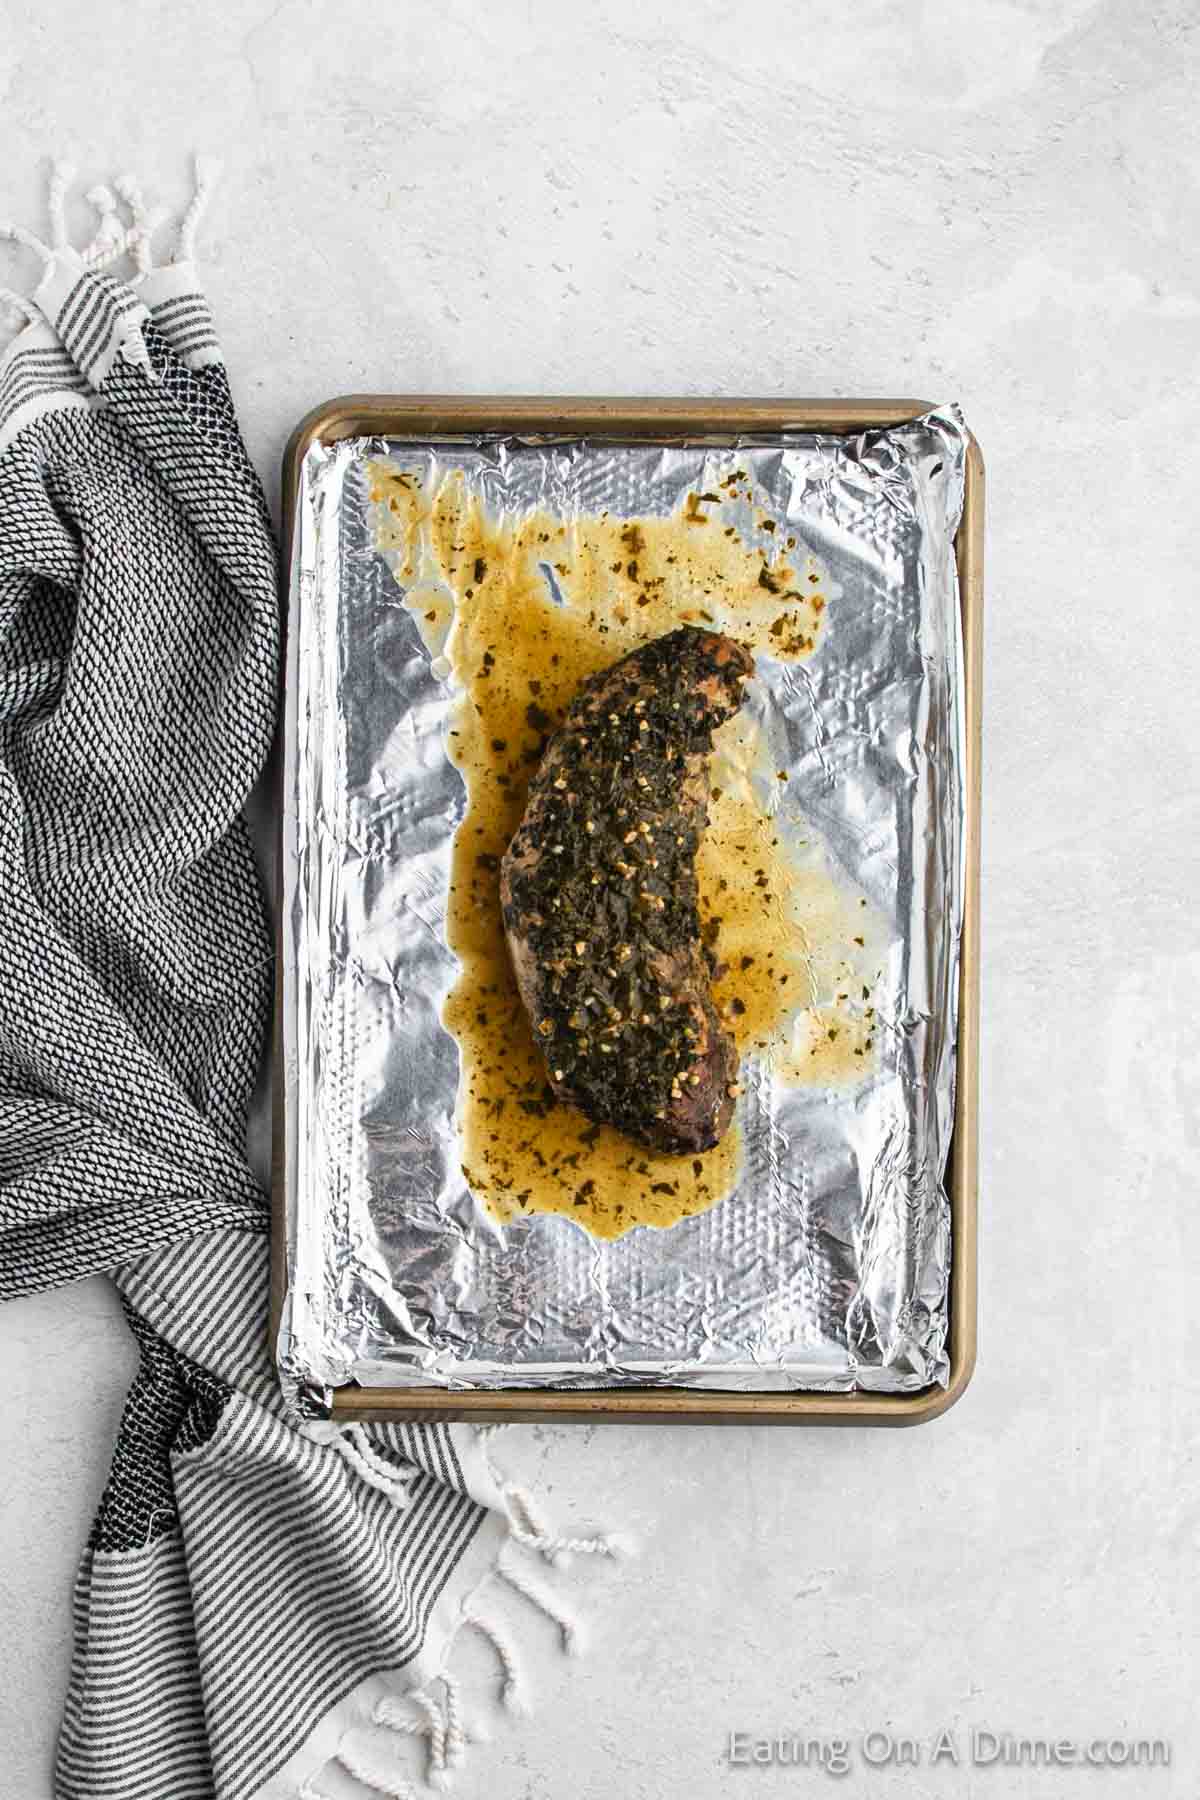 A seasoned and cooked steak rests on a foil-lined baking sheet, with juices pooling around it. The baking sheet is placed on a light gray surface next to a crumpled black and white striped cloth, reminiscent of the savory flavors found in a Crock Pot Cuban Mojo Pork Tenderloin recipe.